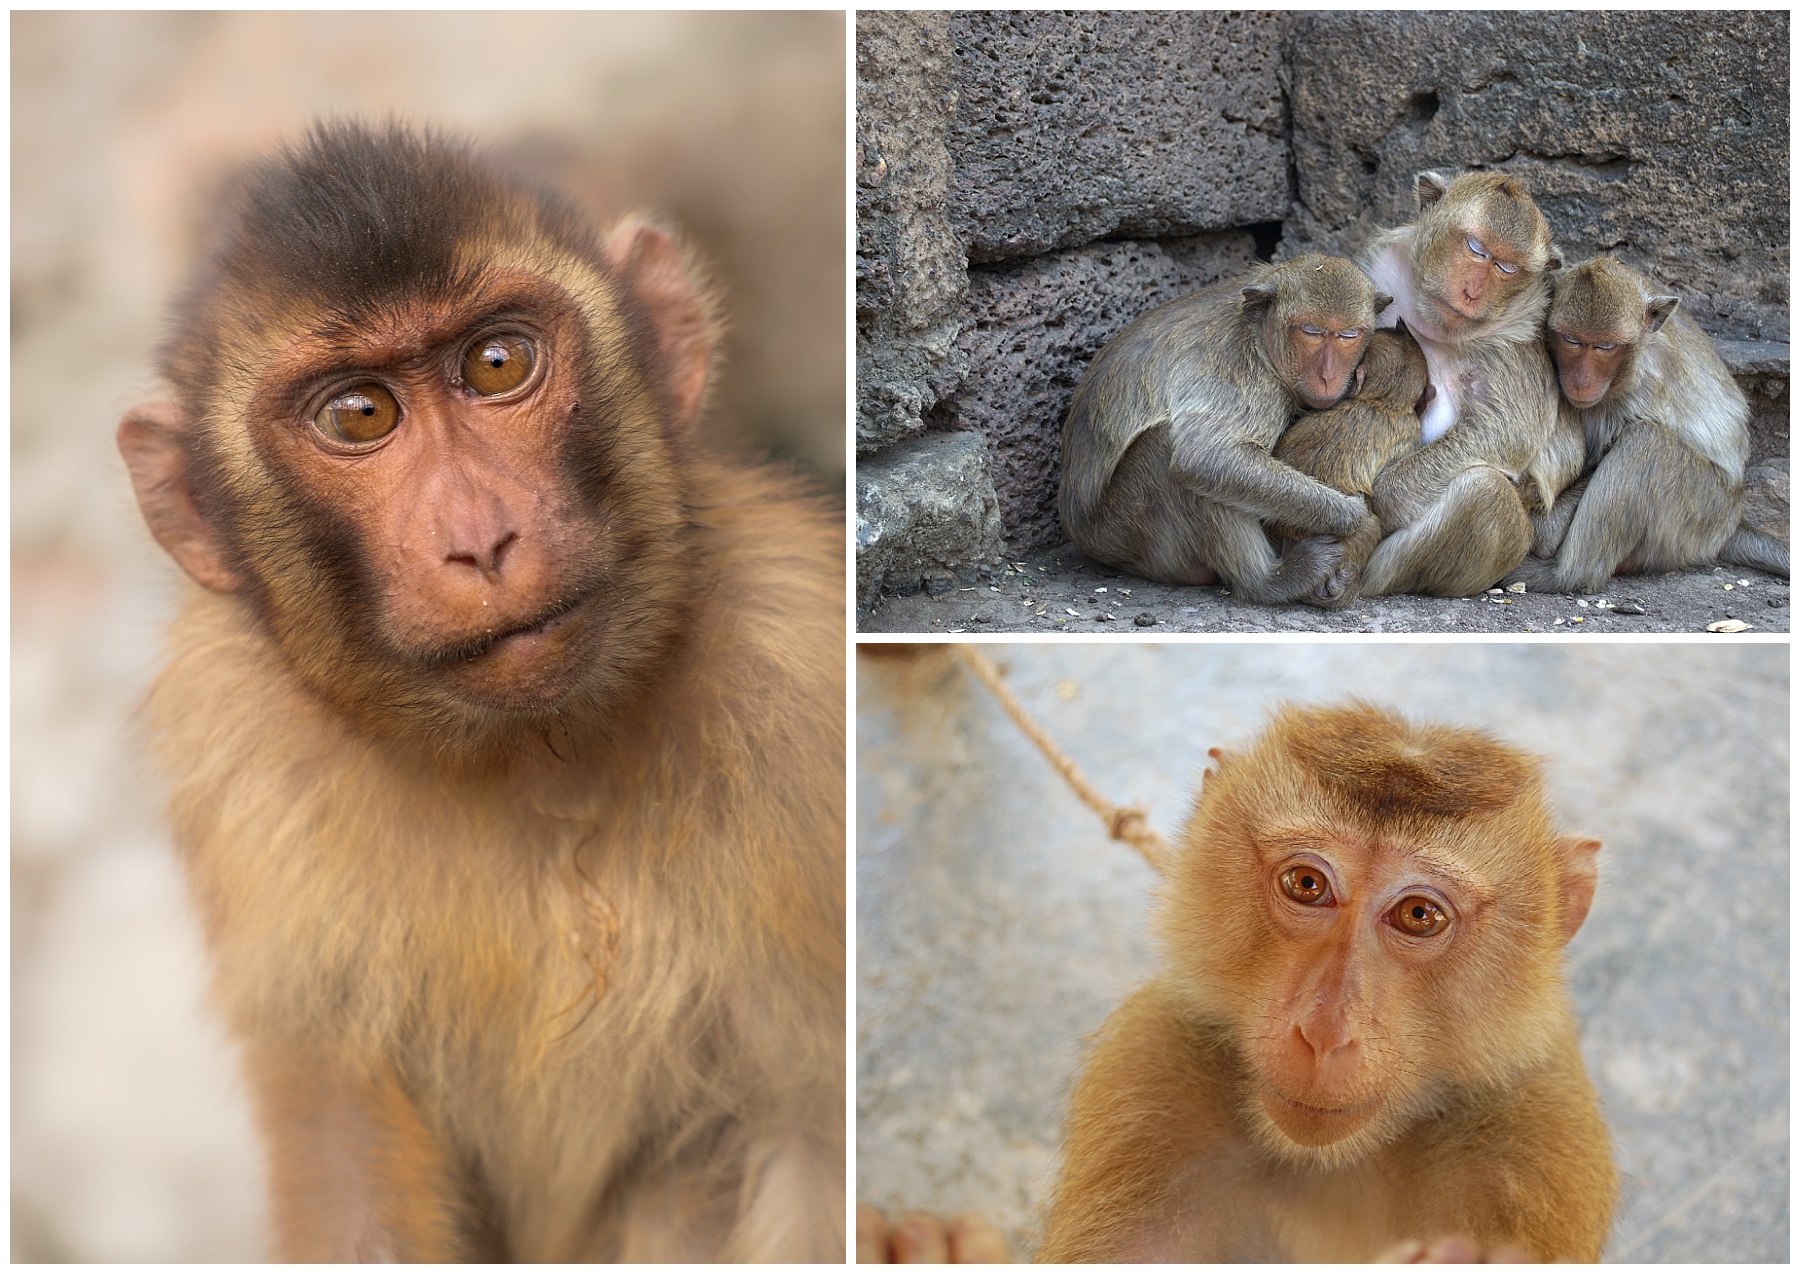 Pixabay images of macaques from Asia and India.  